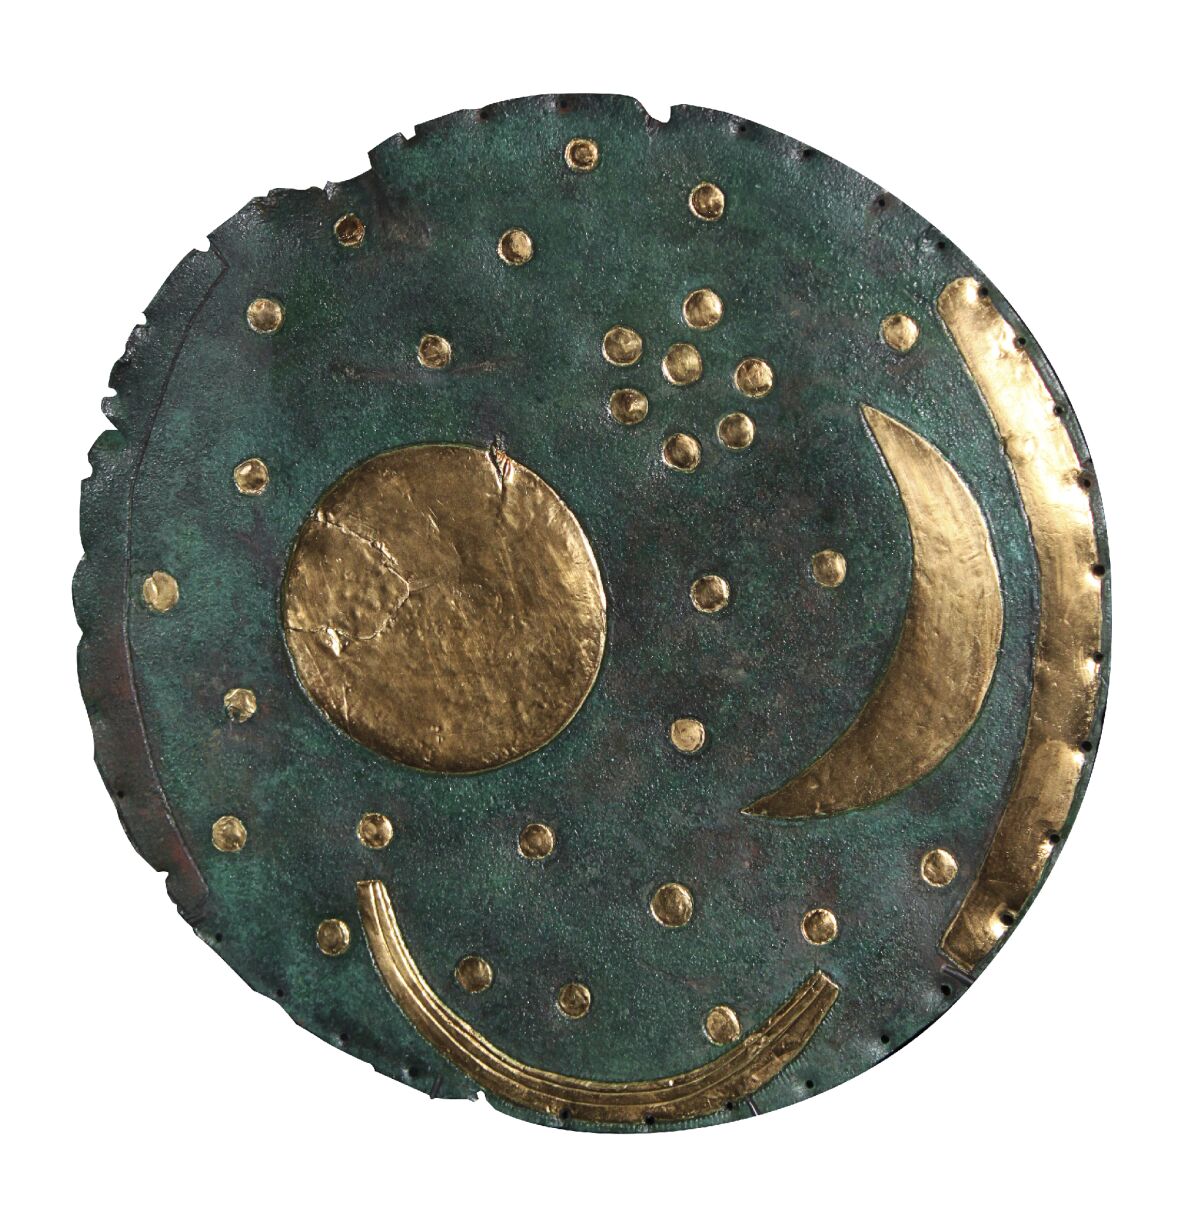 This image courtesy of the State Office for Heritage Management and Archaeology Saxony-Anhalt shows the Nebra Sky Disc. The British Museum will display what it says is the world’s oldest surviving map of the stars in a major upcoming exhibition on the Stonehenge stone circle. The 3,600-year-old “Nebra Sky Disc,” first discovered in Germany in 1999, is one of the oldest surviving representations of the cosmos in the world and has never before been displayed in the U.K., the London museum said Monday. (Juraj Liptak/State Office for Heritage Management and Archaeology Saxony-Anhalt via AP)